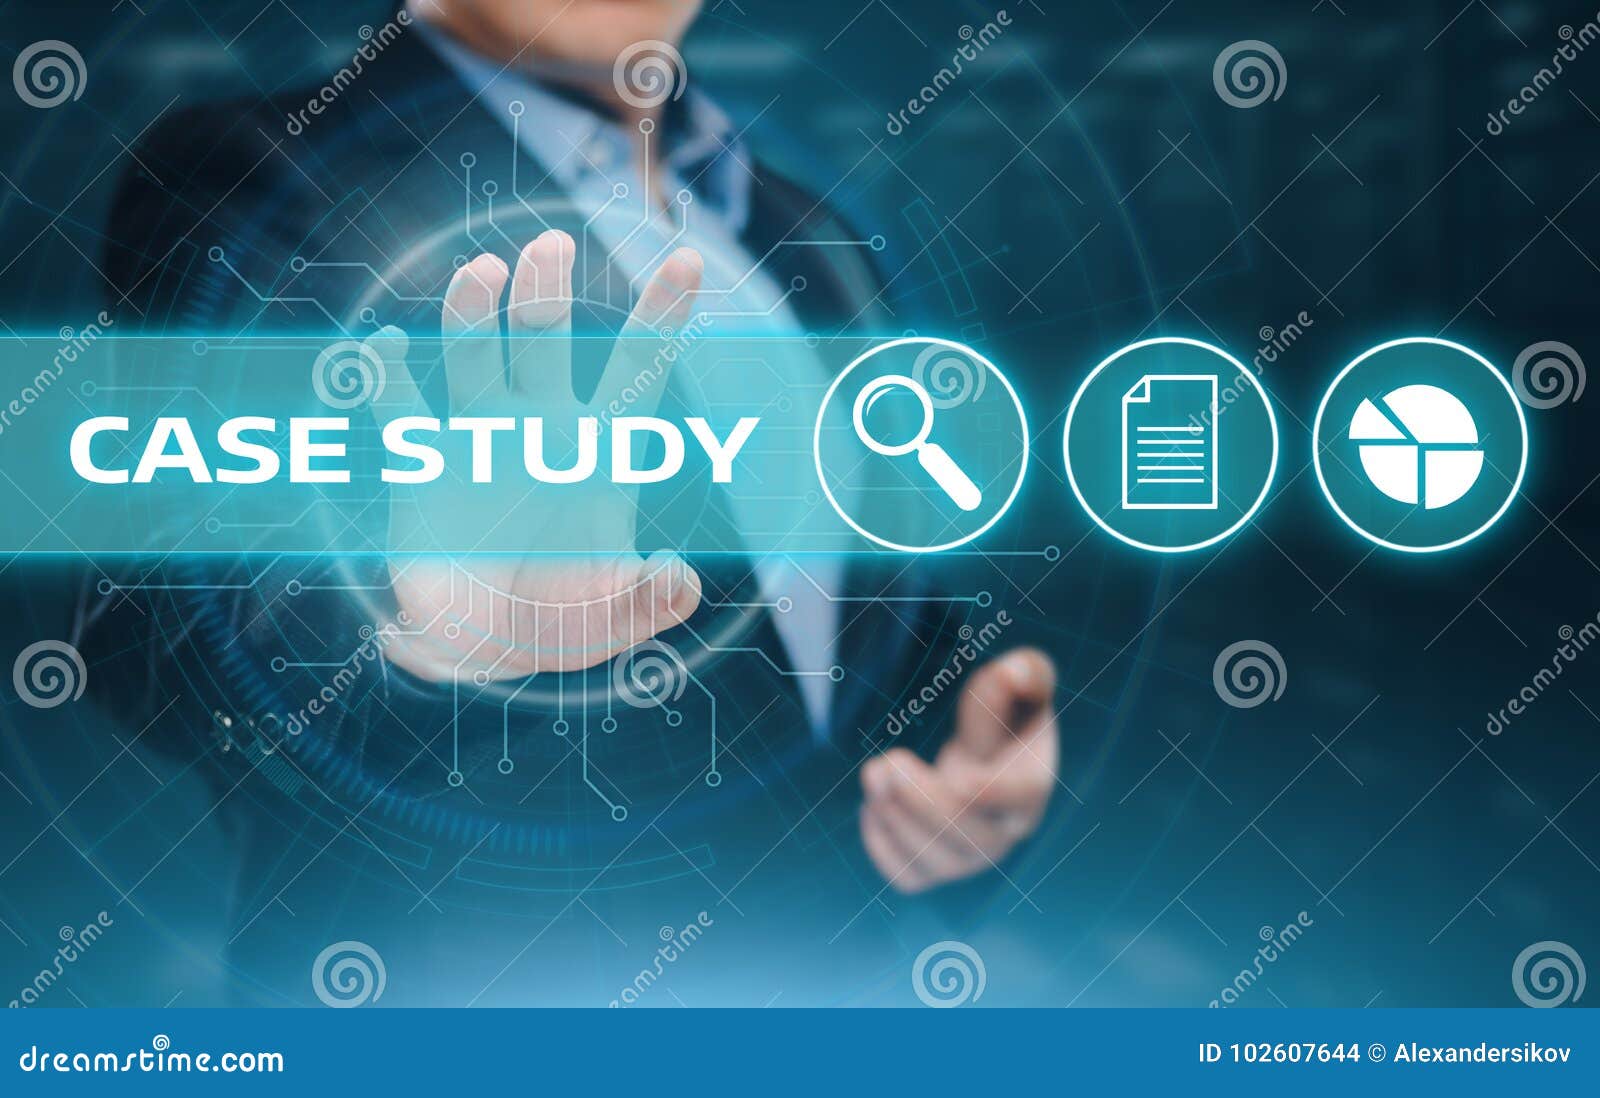 case study knowledge education information business technology concept